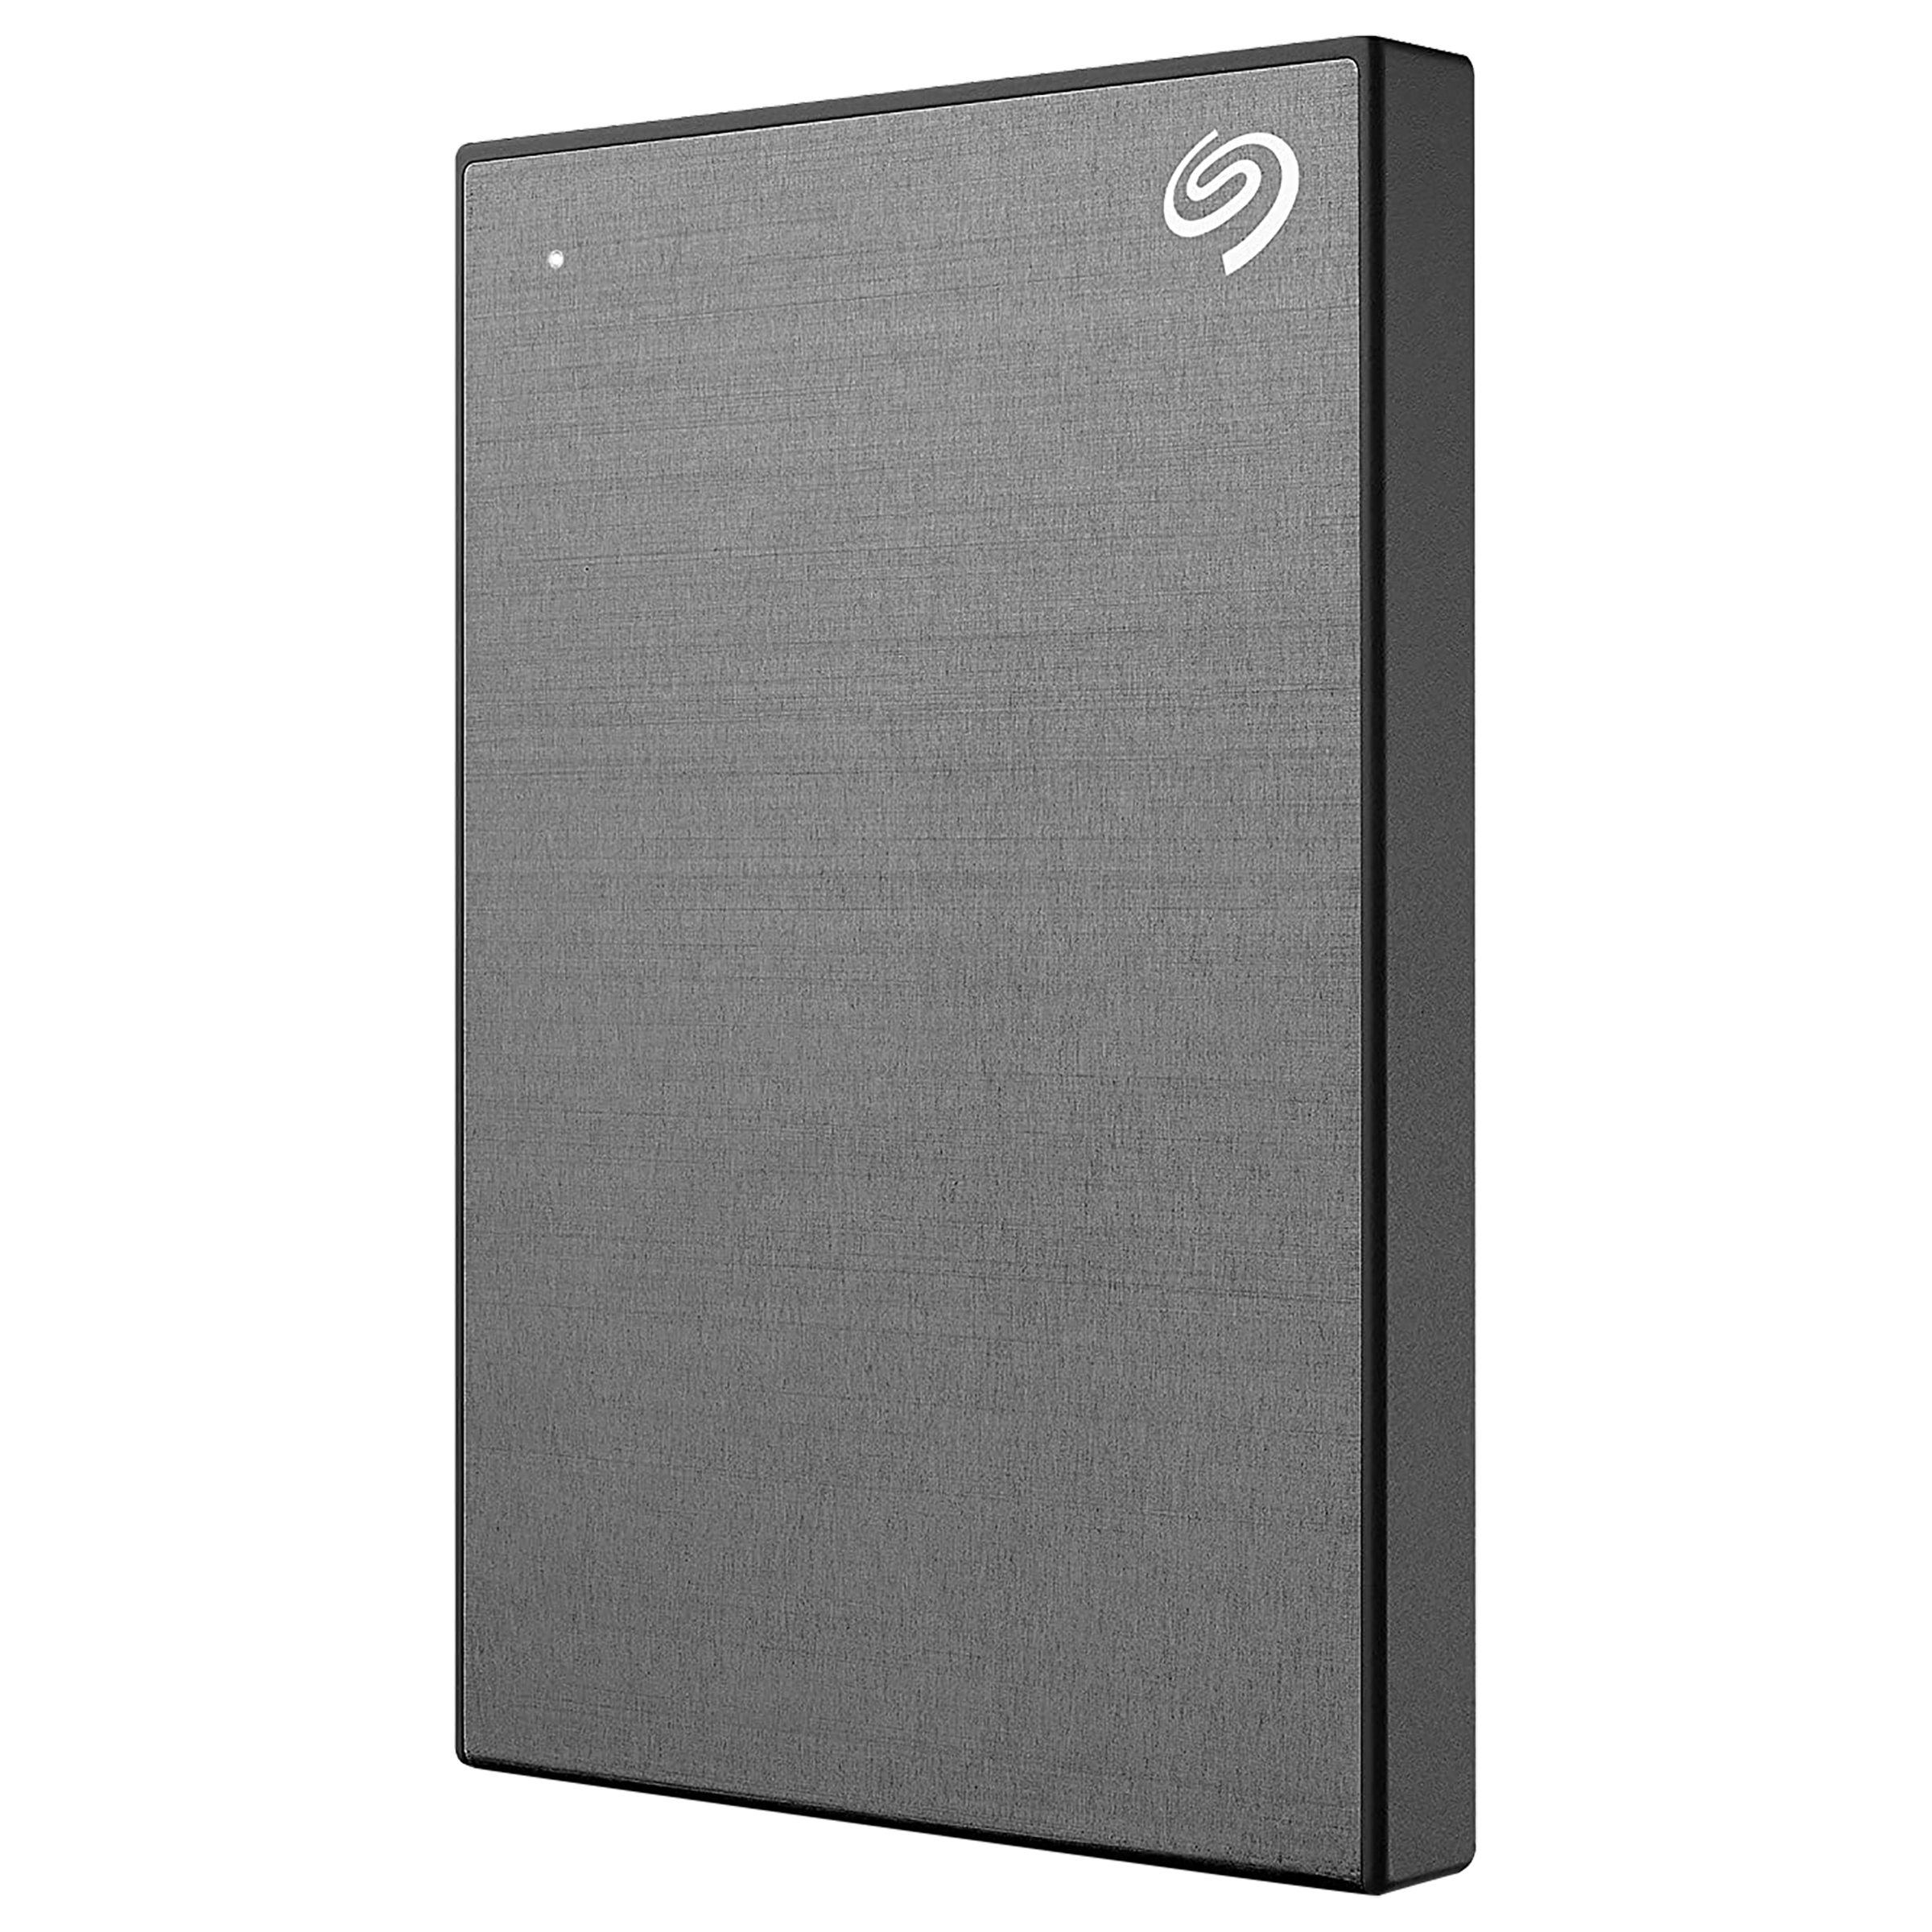 Seagate - Seagate One Touch 2TB USB 3.0 Hard Disk Drive (Password Activated Hardware Encryption, STKY2000404, Grey)